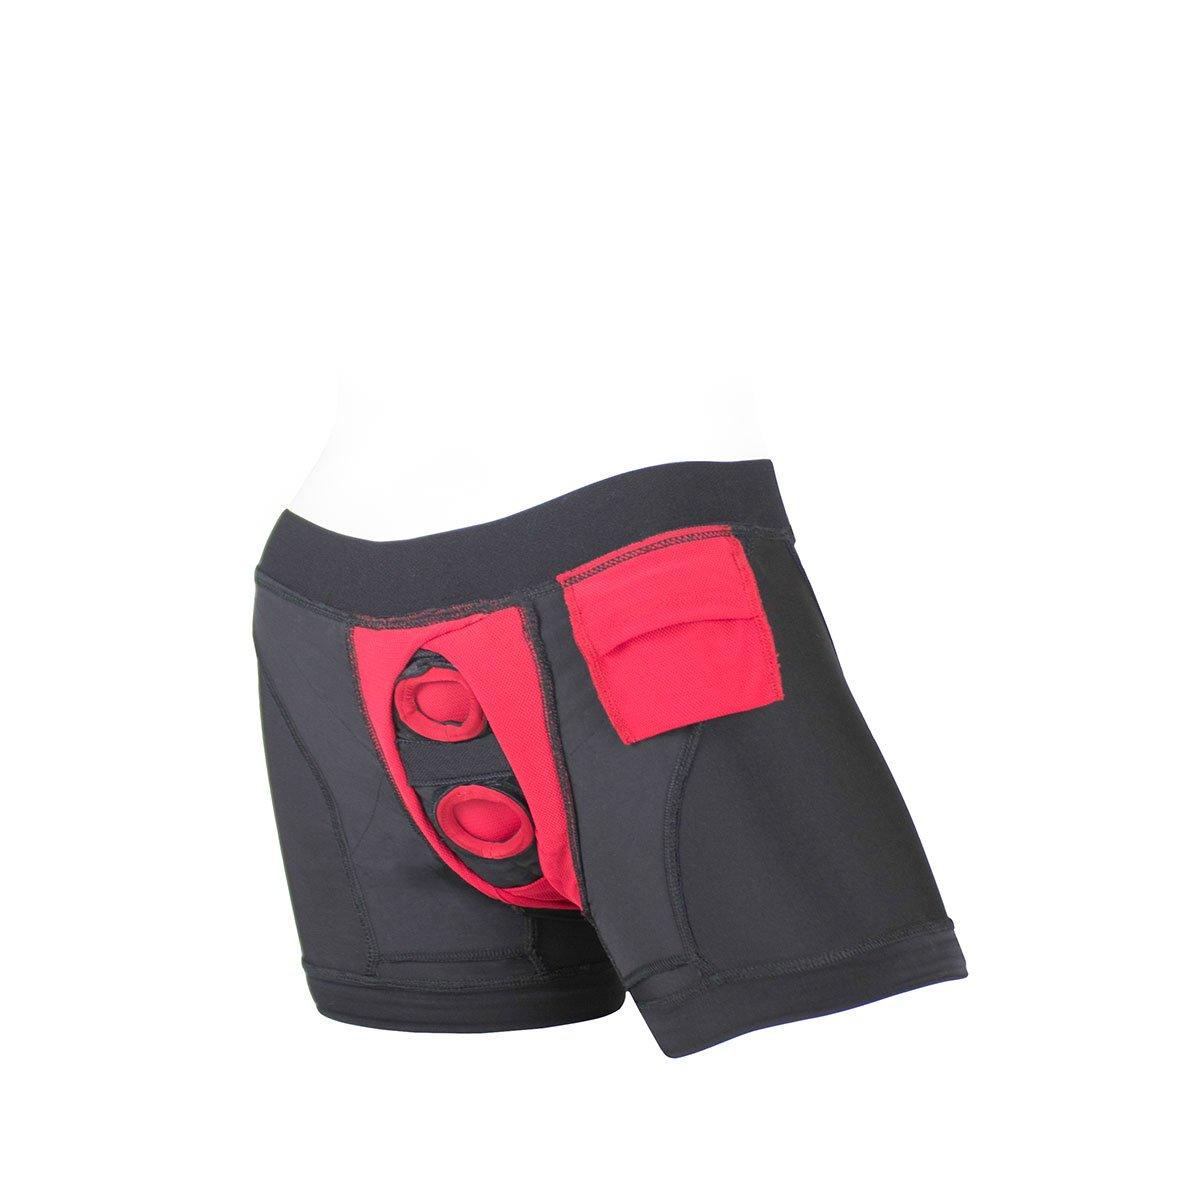 Tomato SpareParts Tomboii Black and Red